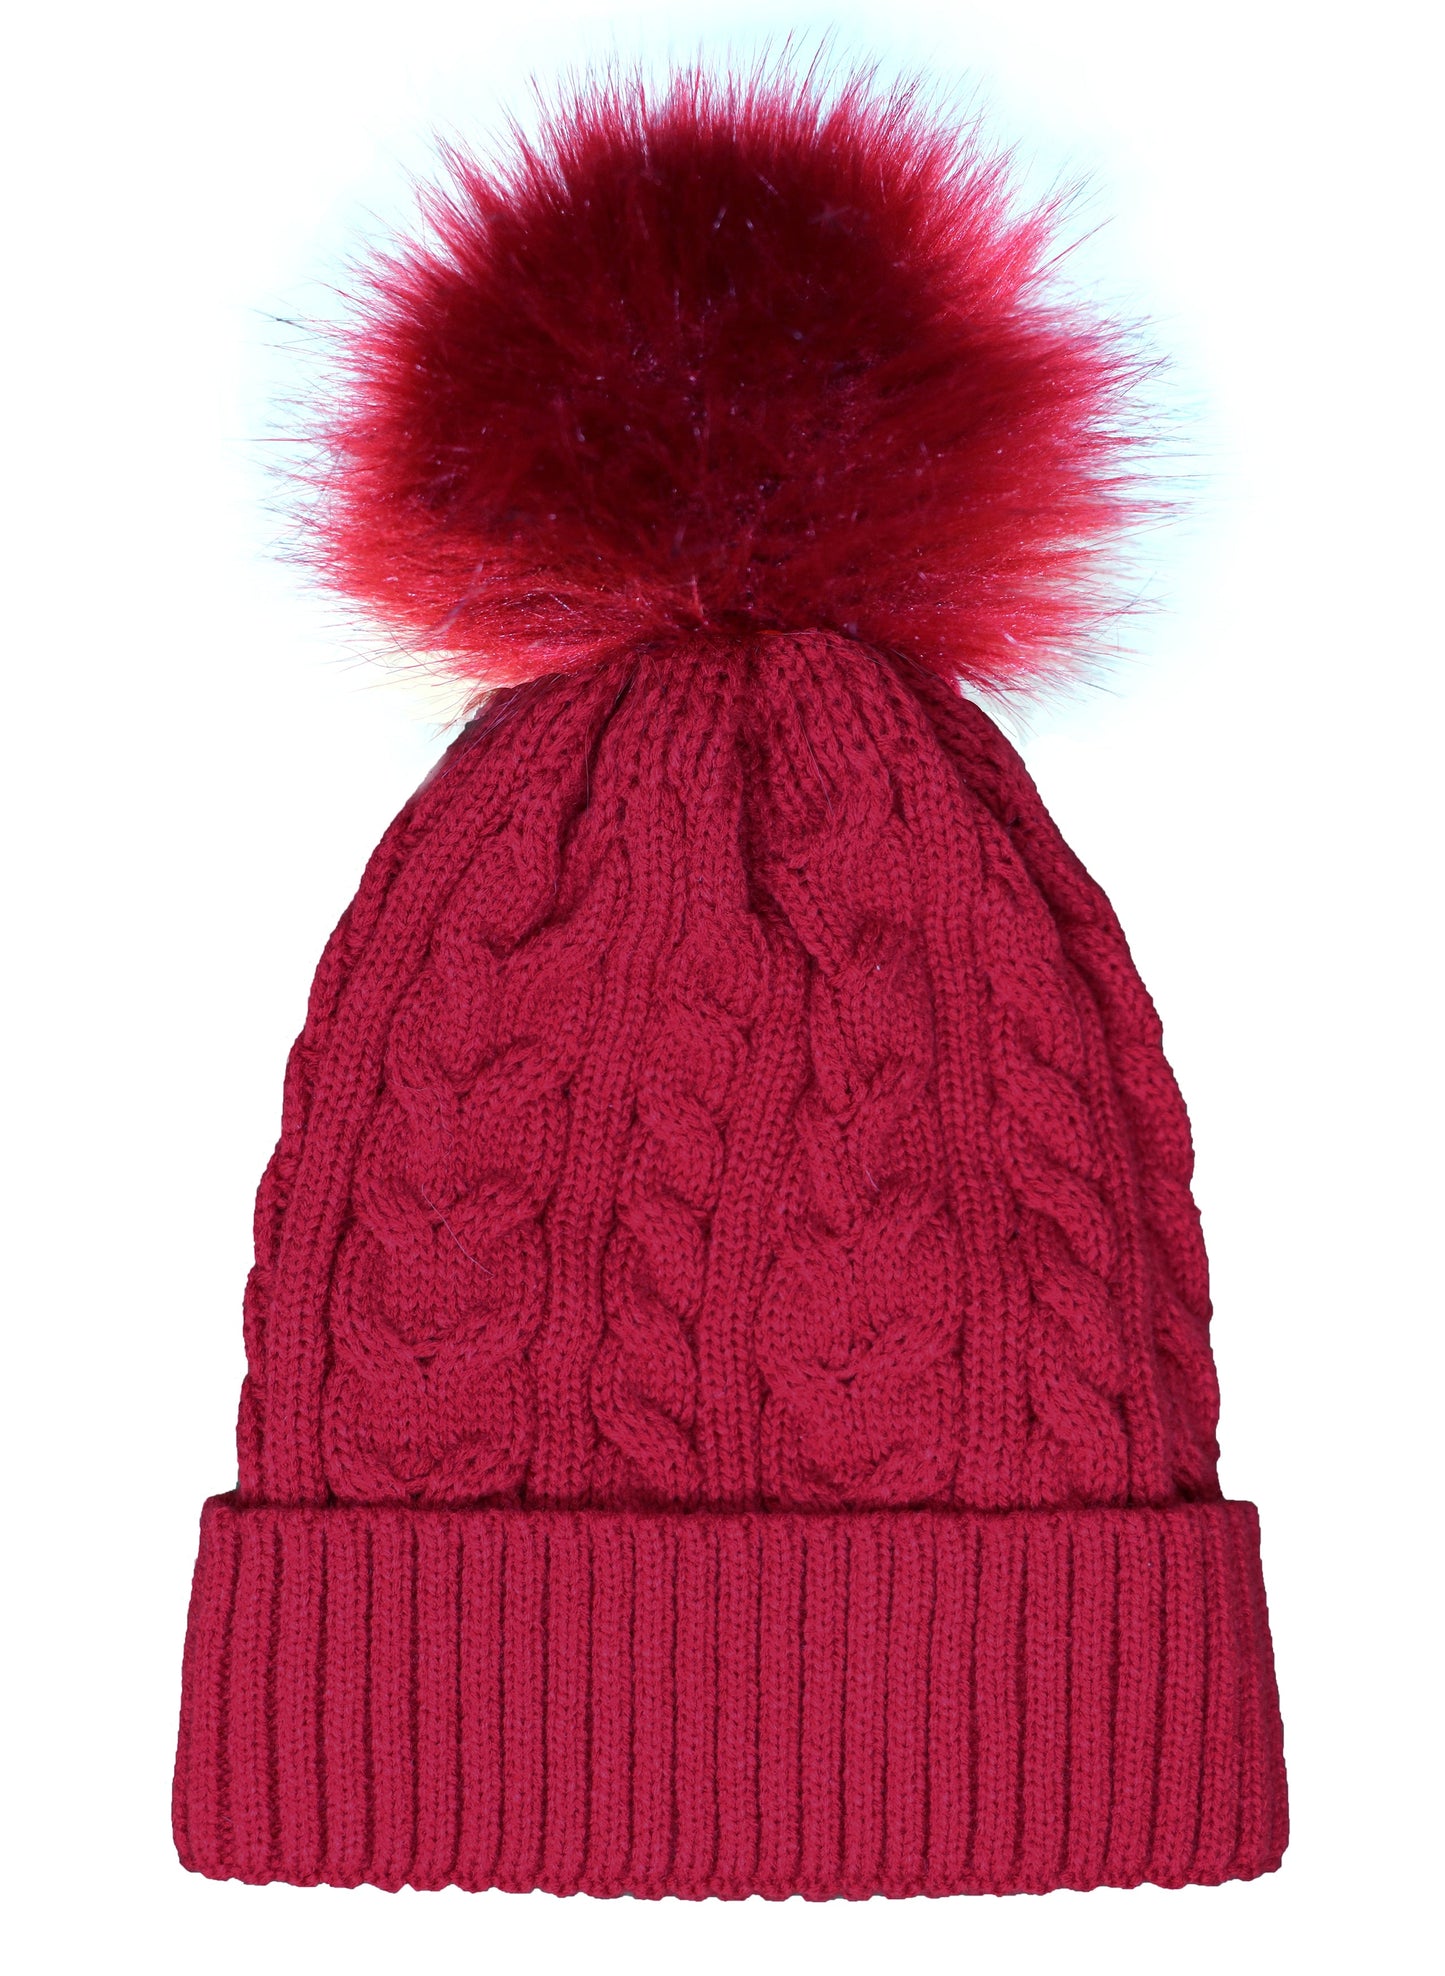 Adult Cable Knitted Pom Pom Hat With Faux Fur Lining